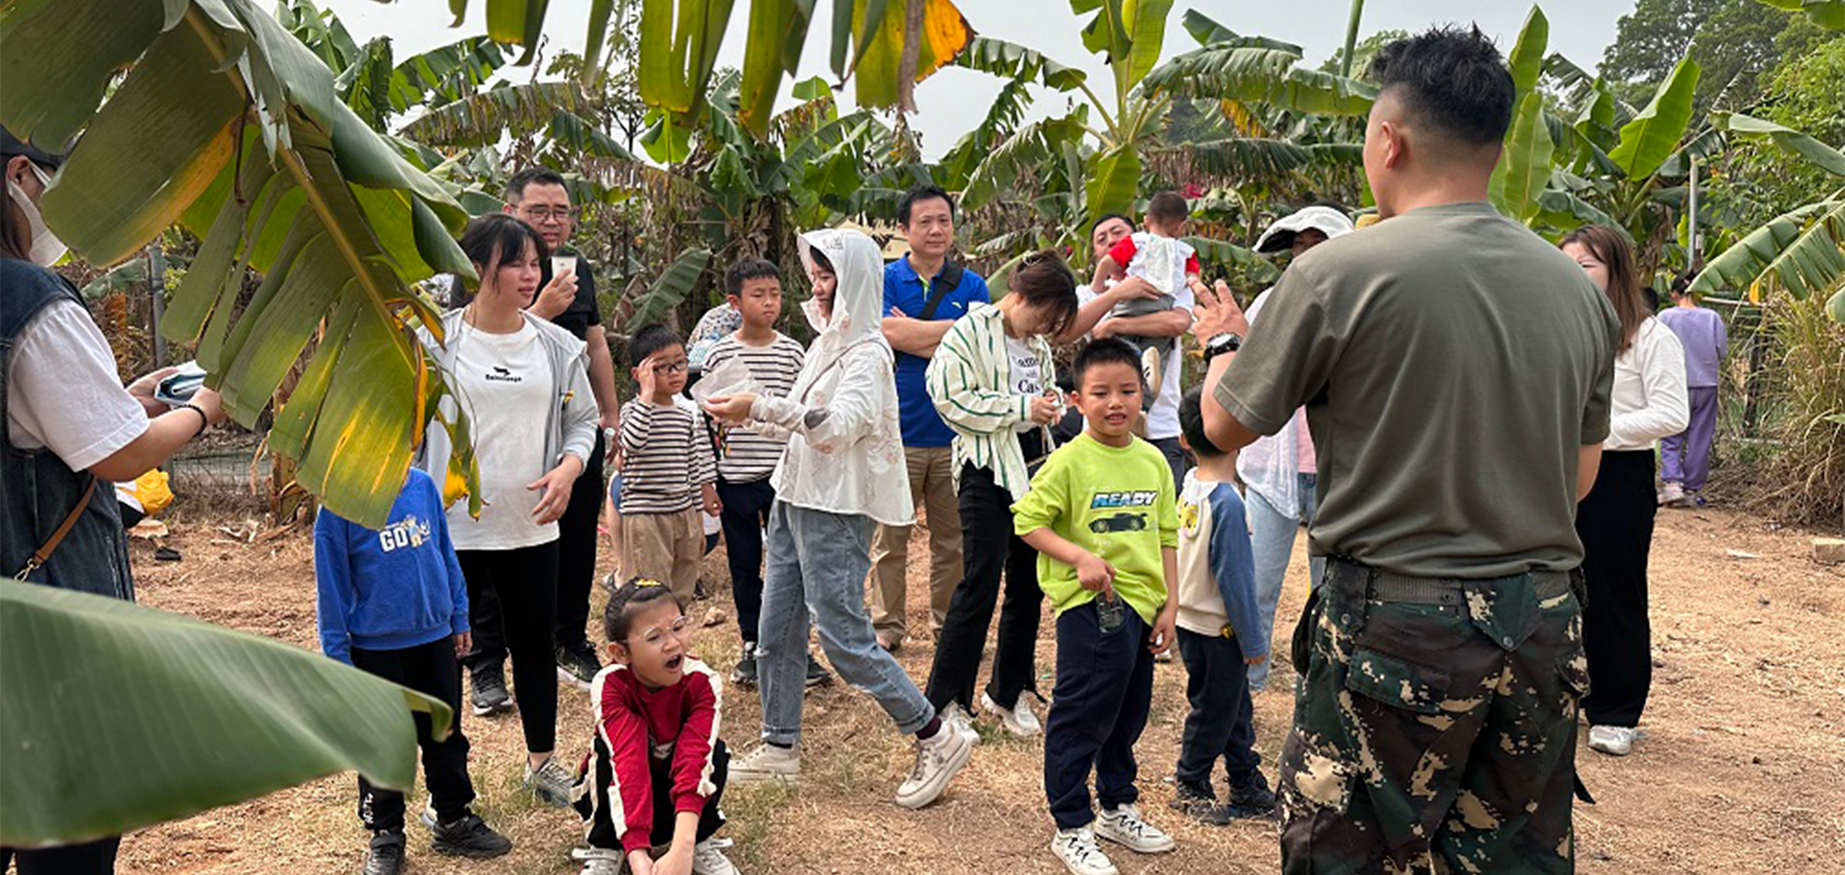 Elebao organized employees' families and their children to participon this year's Arbor Day